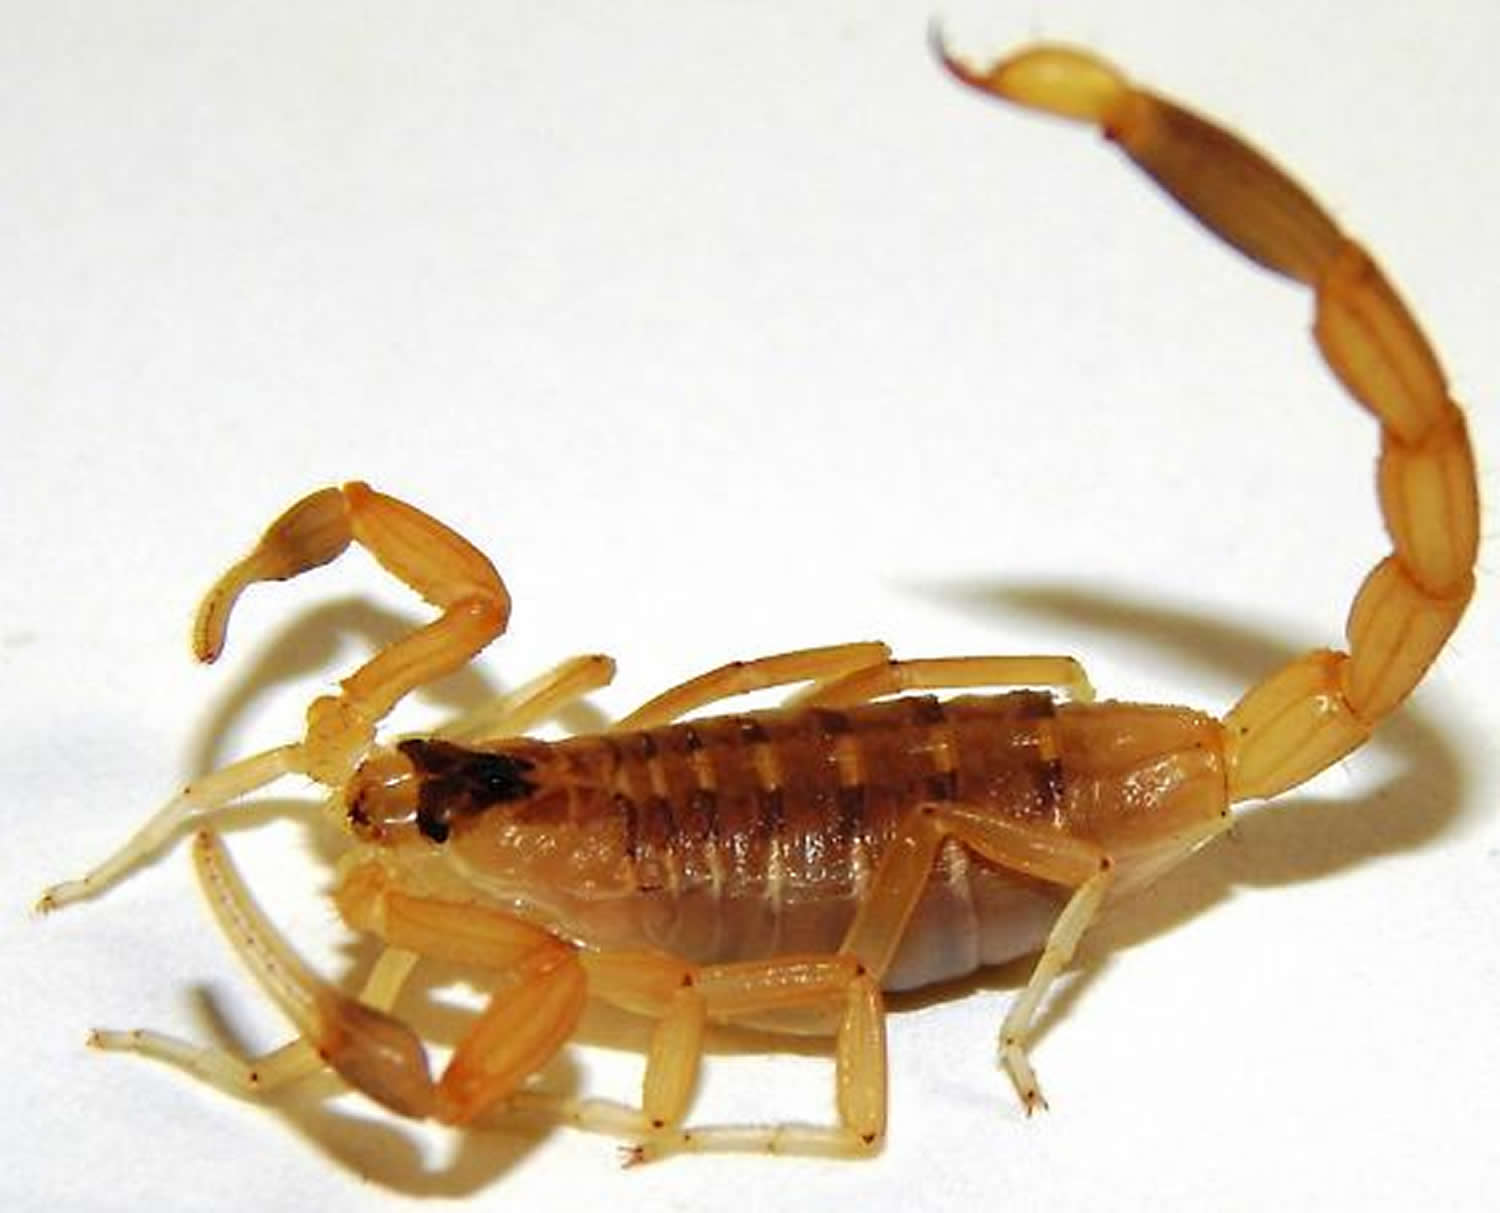 How To Cure Scorpion Stings - Gradecontext26